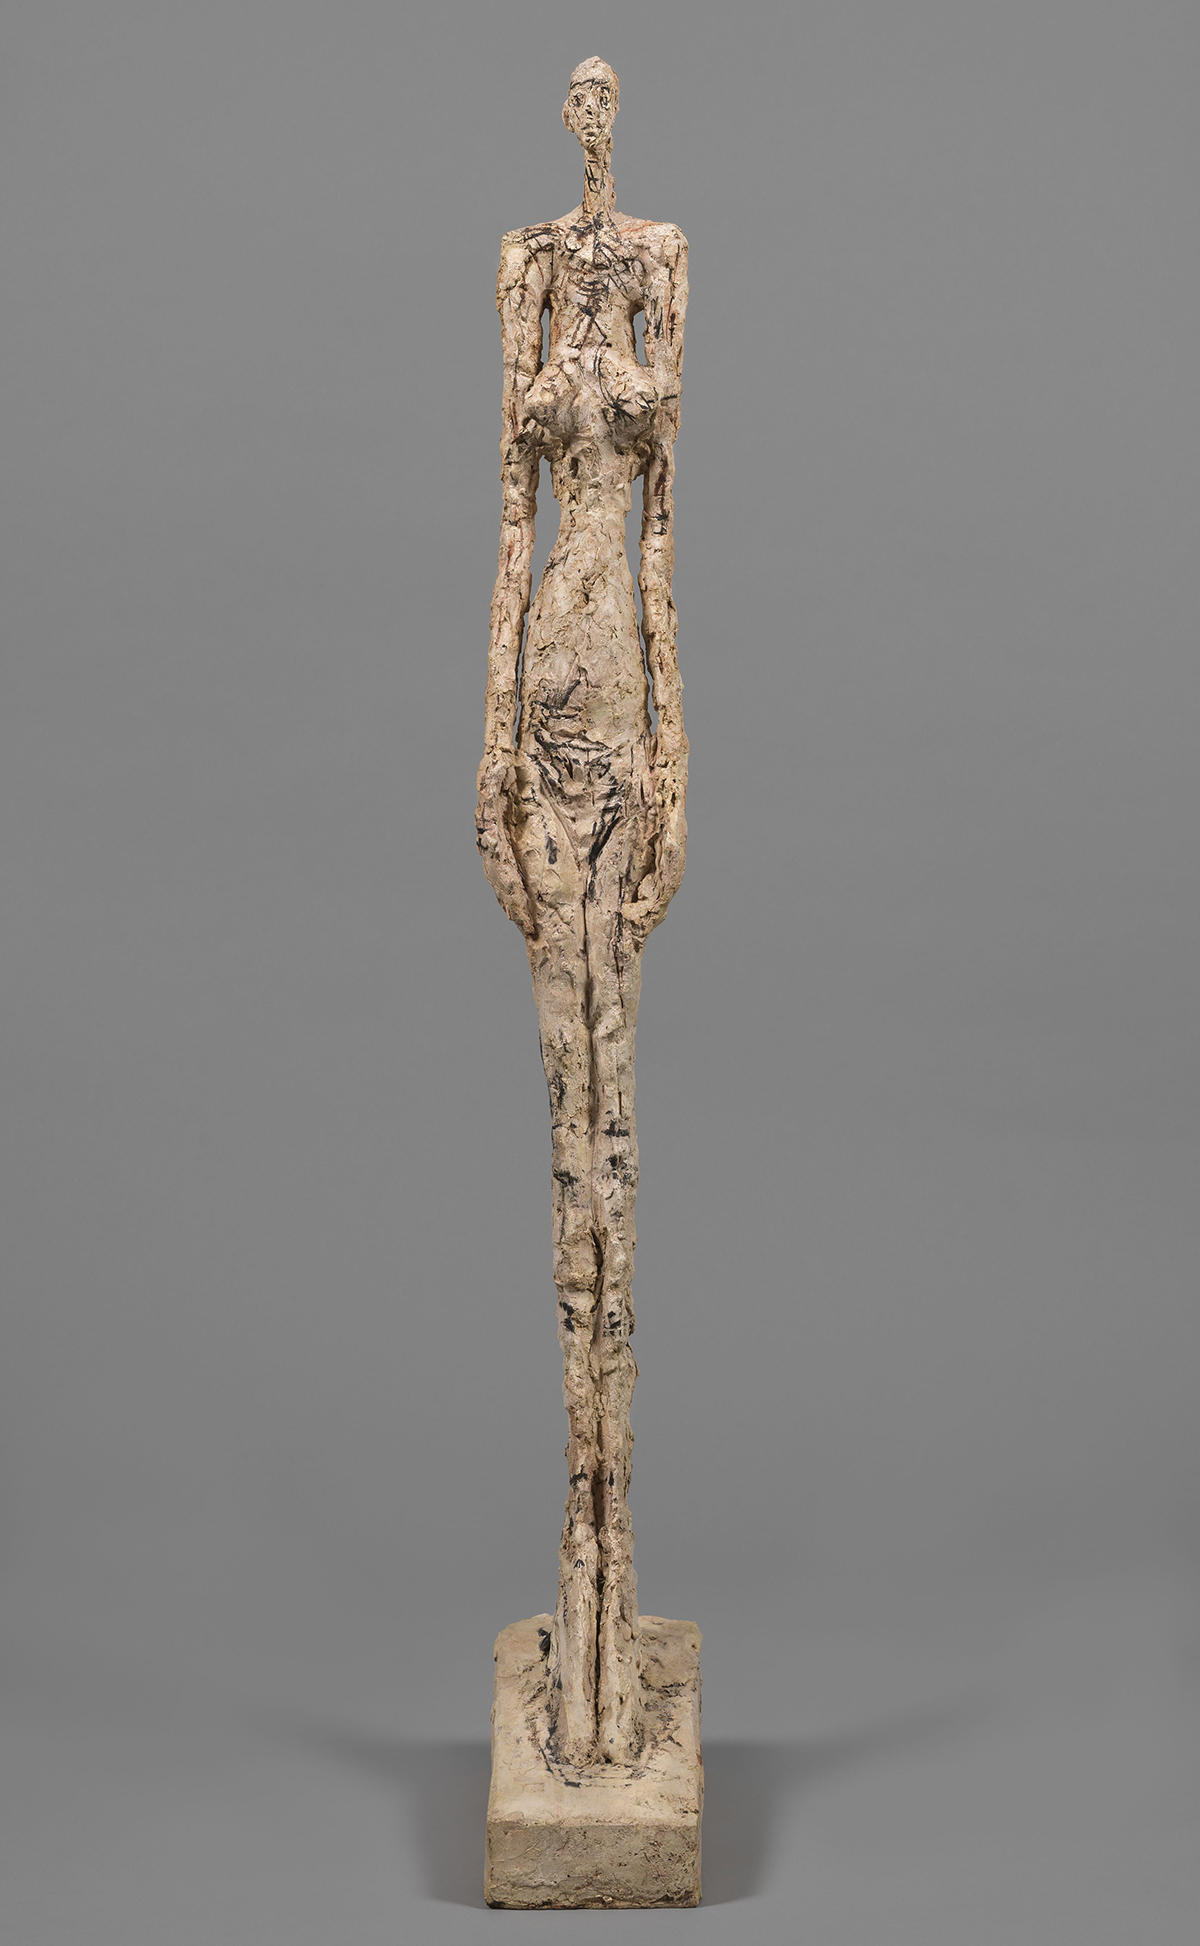 Woman of Venice V (1956) by Giacometti. Image courtesy of The Tate